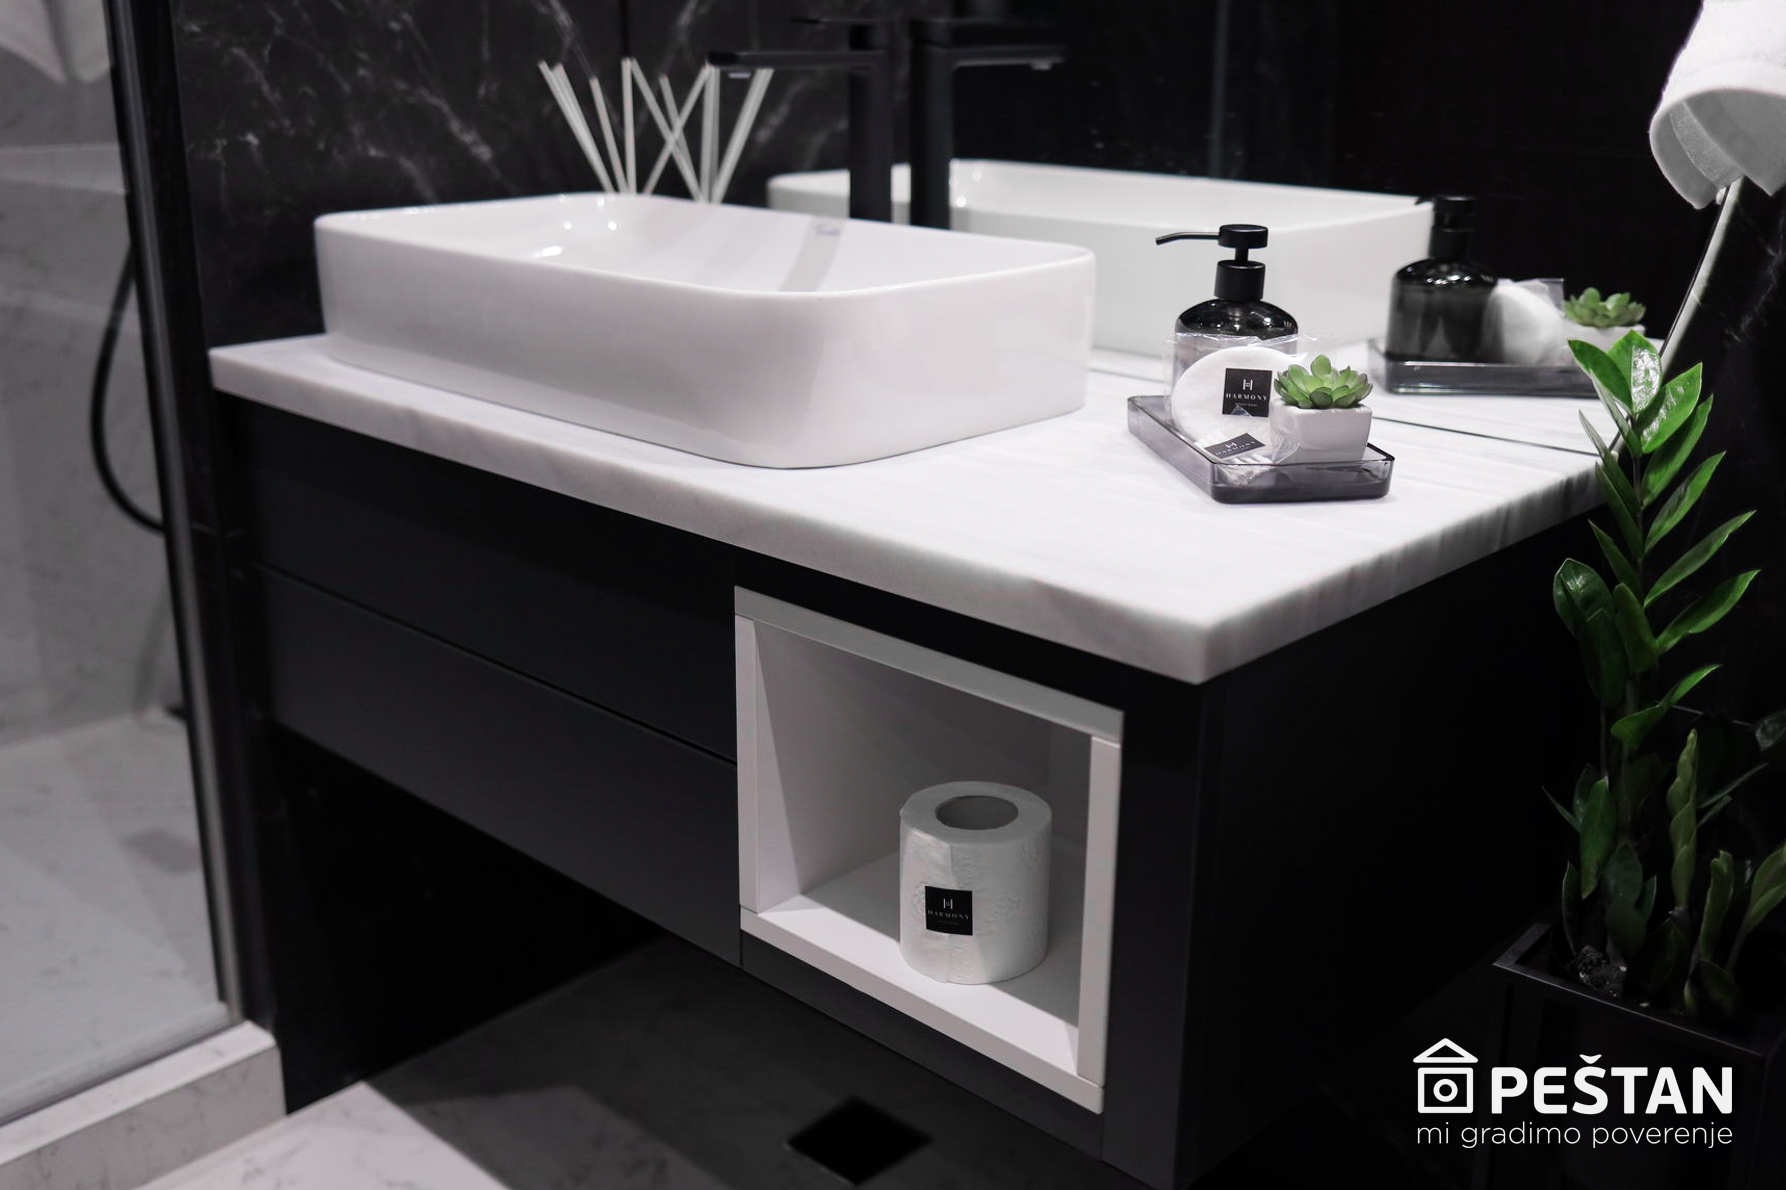 Modern bathroom - Our place to enjoy